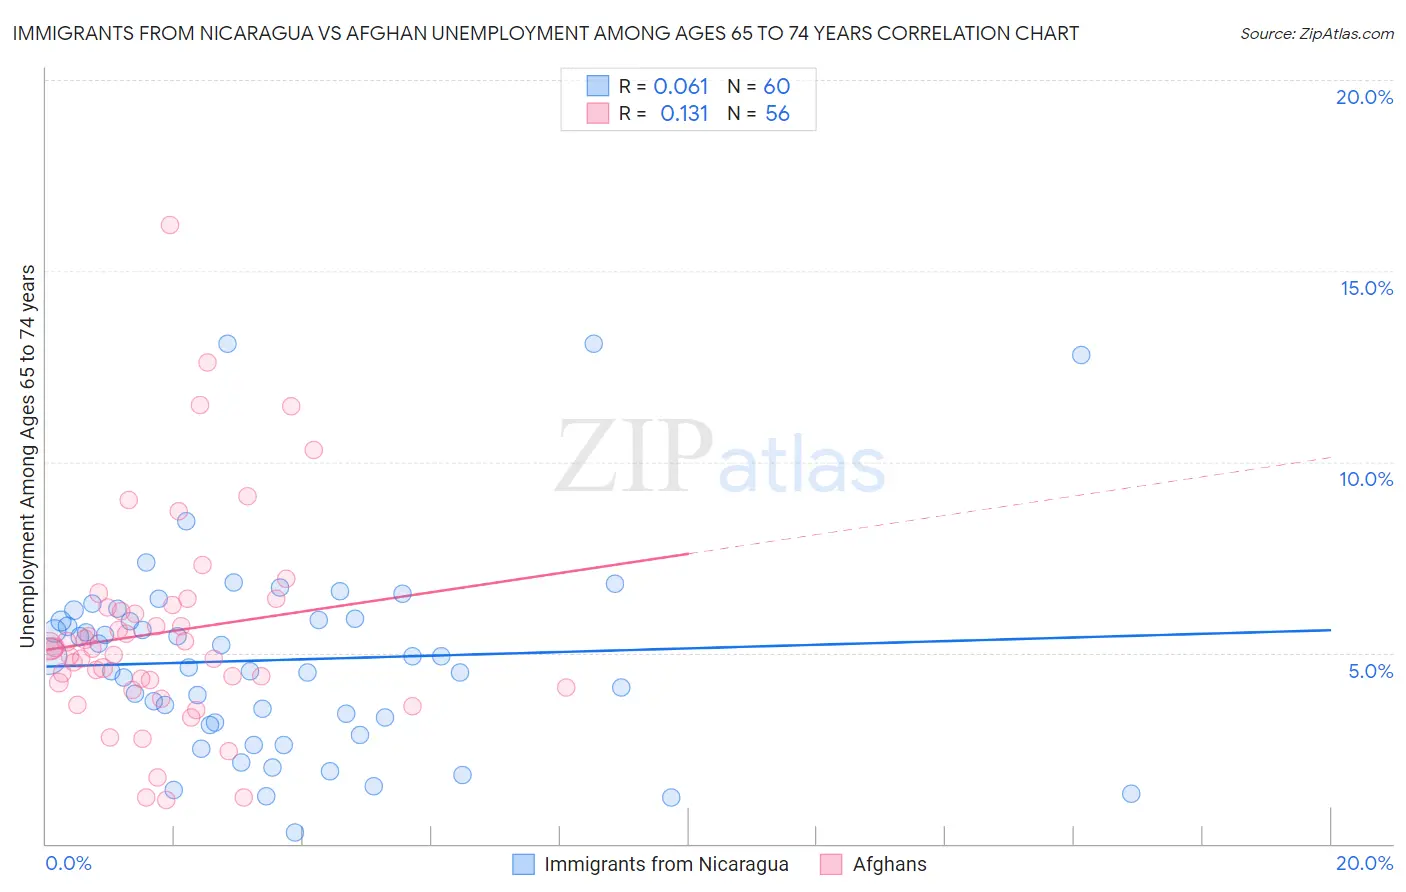 Immigrants from Nicaragua vs Afghan Unemployment Among Ages 65 to 74 years